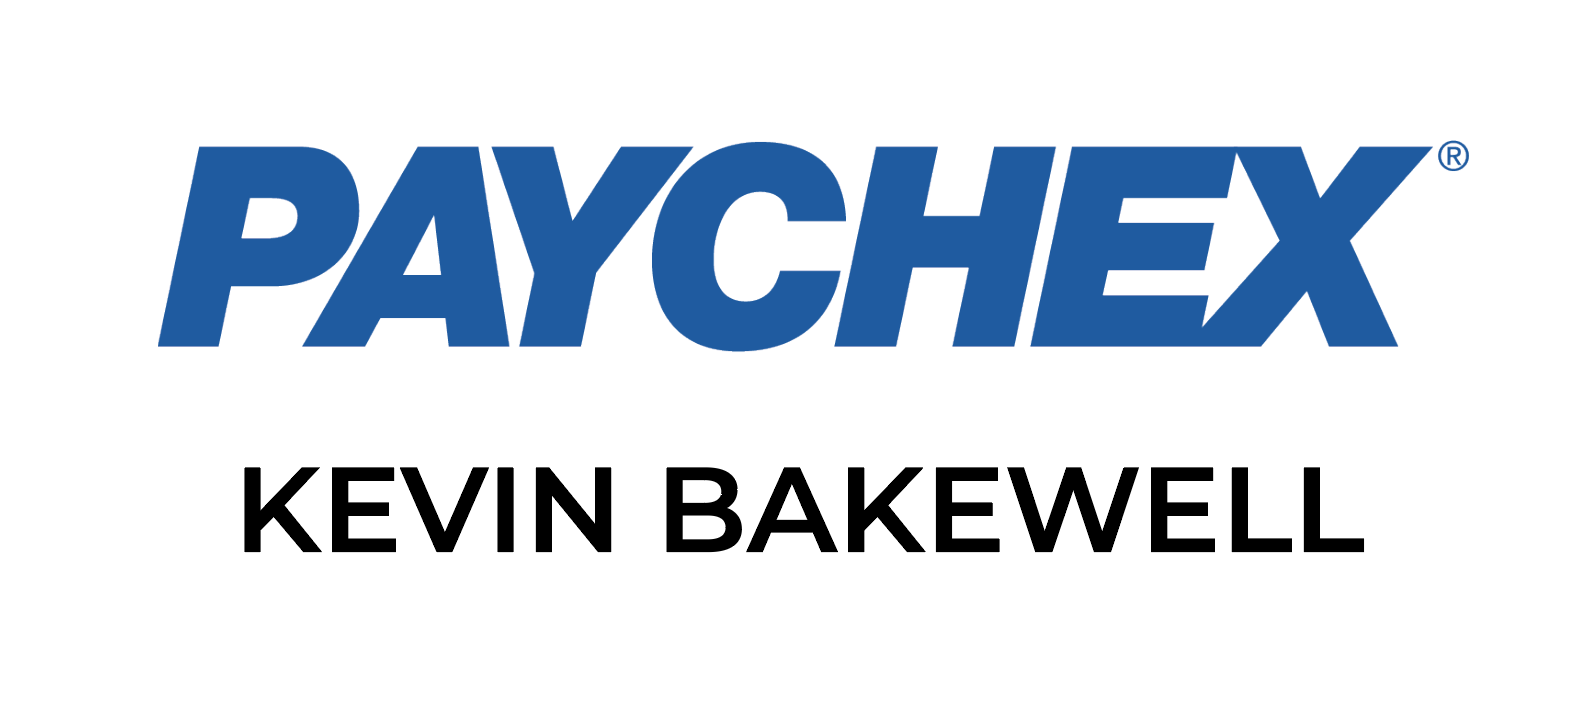 Paychex Bakewell nametag